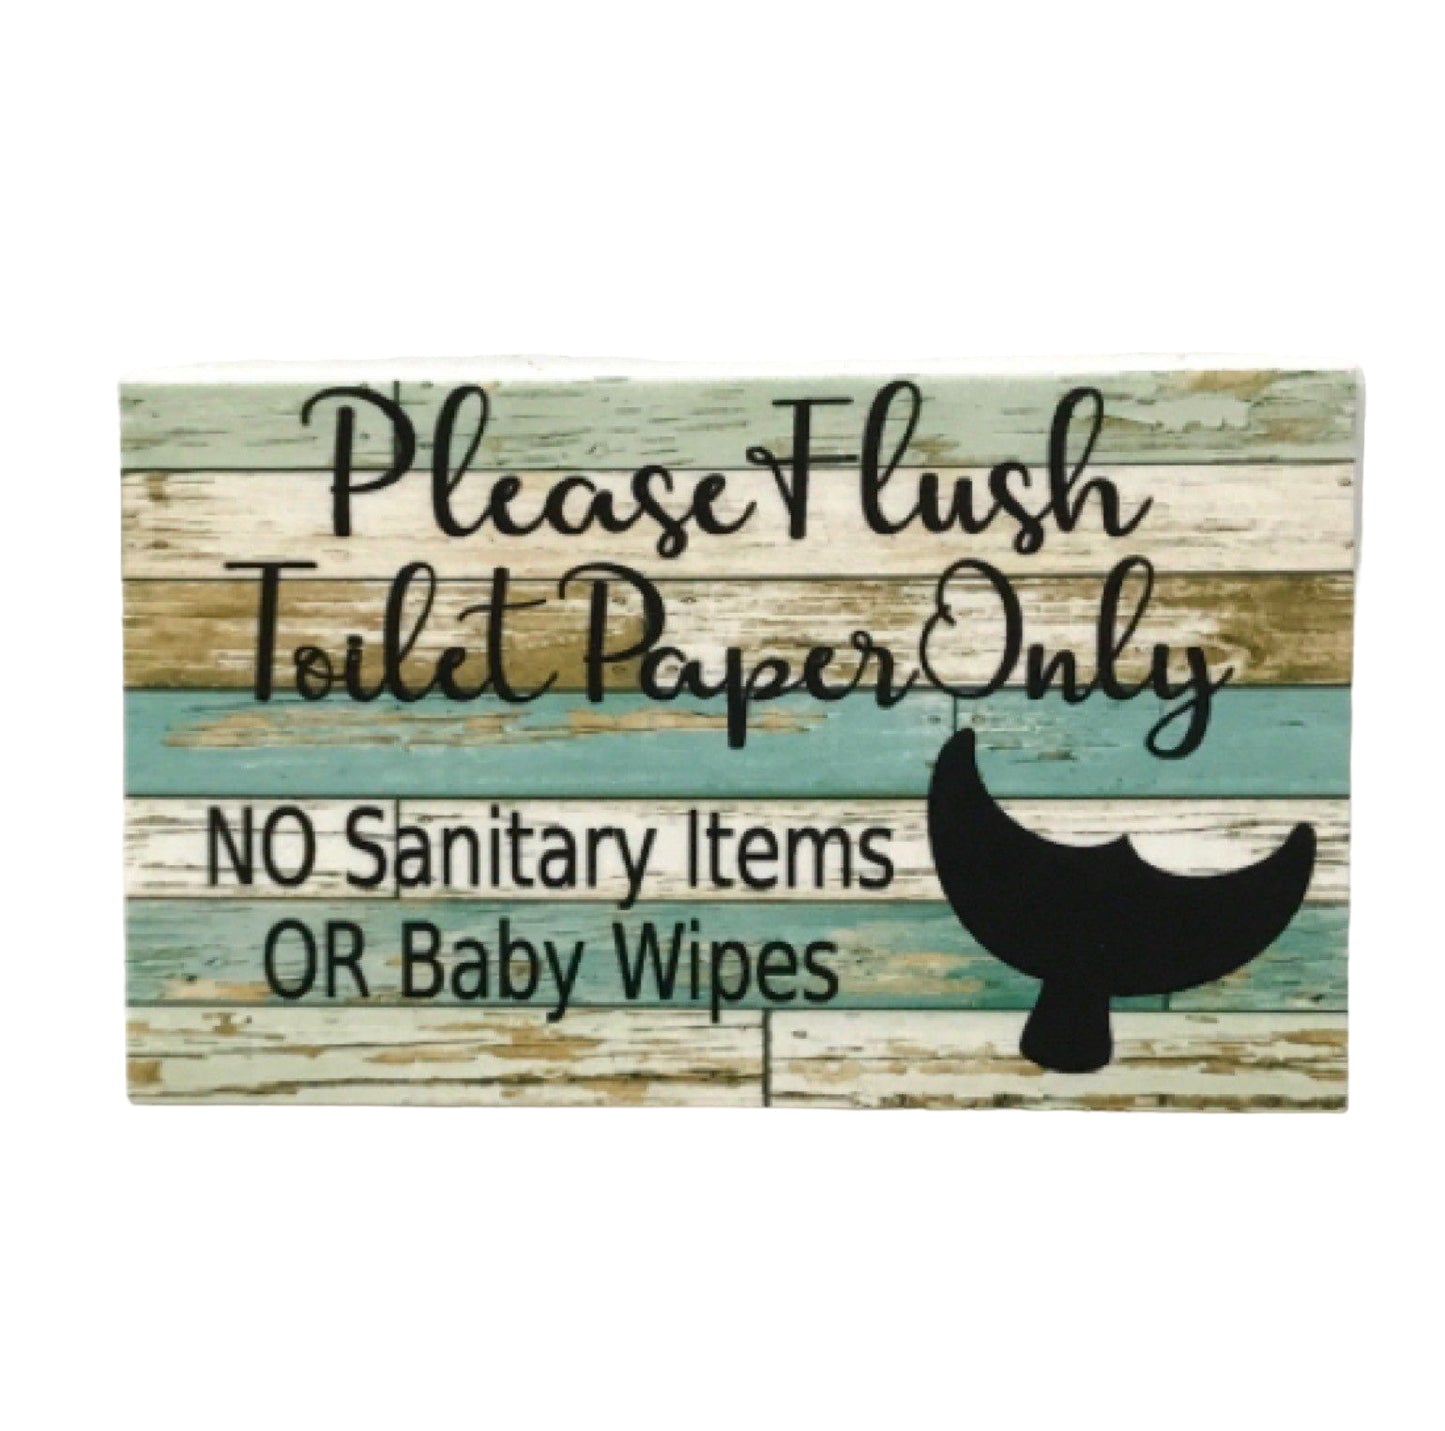 Toilet Paper Only No Sanitary Baby Wipes Whale Blue Sign - The Renmy Store Homewares & Gifts 